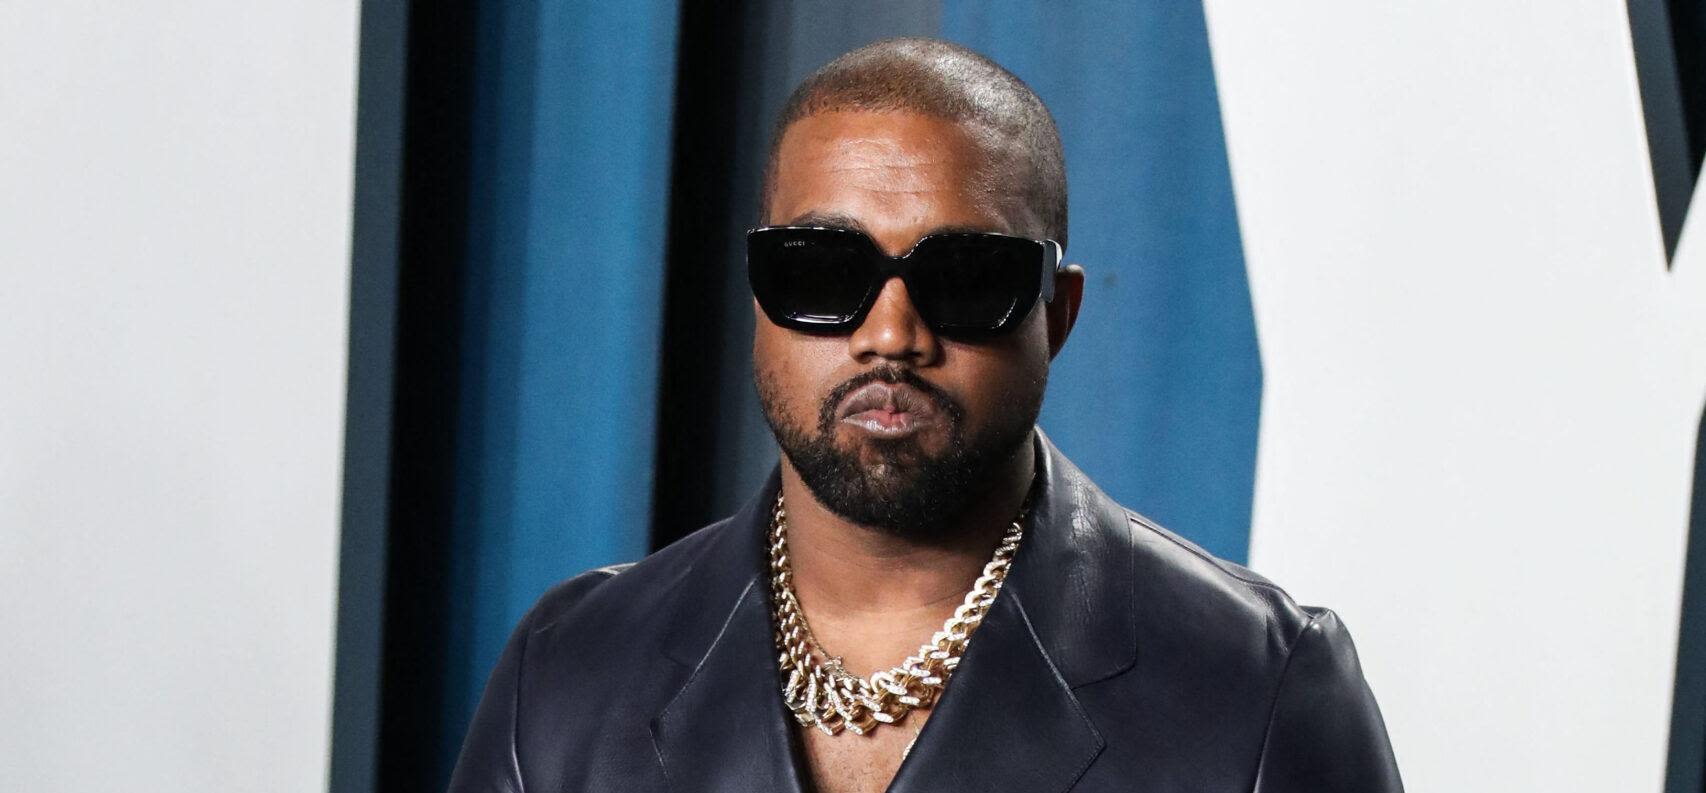 Kanye West Reportedly Splurged Over $40K On Wine For Lavish Paris Dinner With 30 Friends